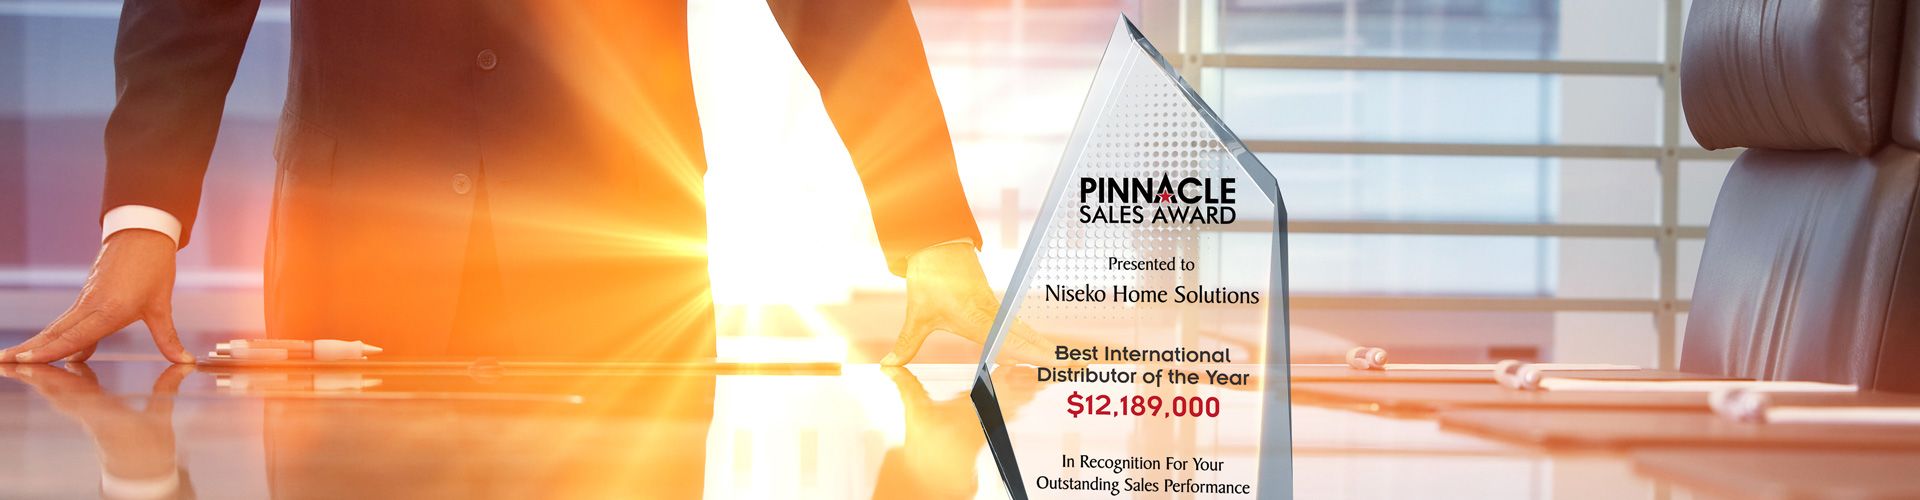 Custom Corporate Sales Recognition Awards and Trophies - Banner 1